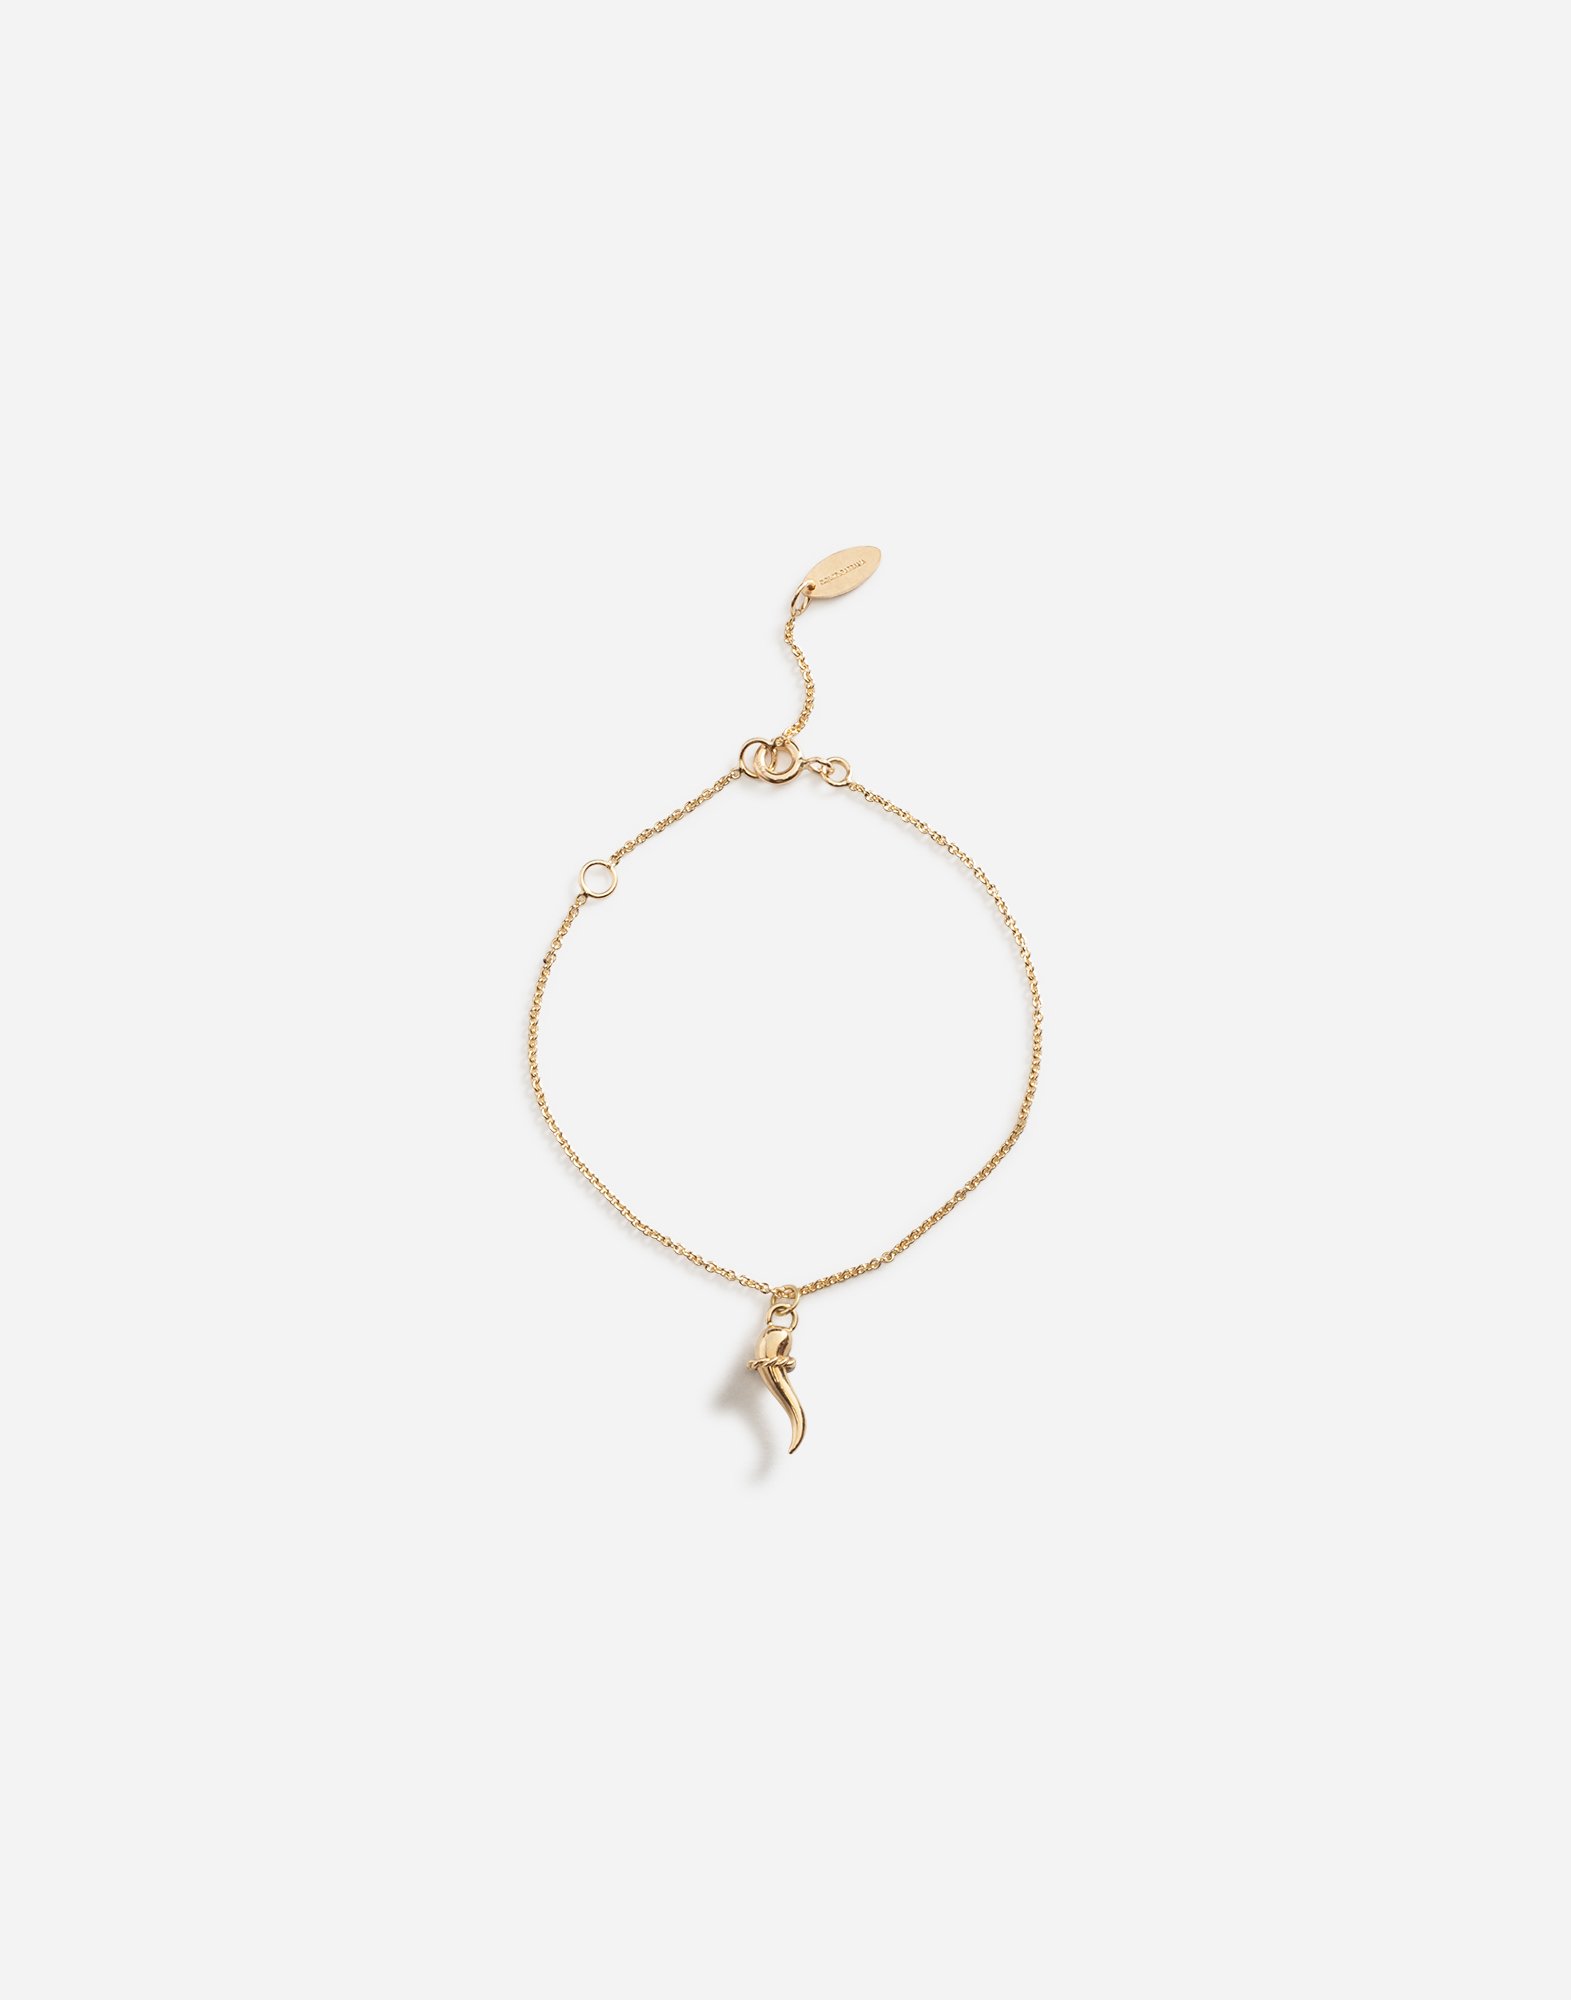 Bracelet with good luck charm in Gold